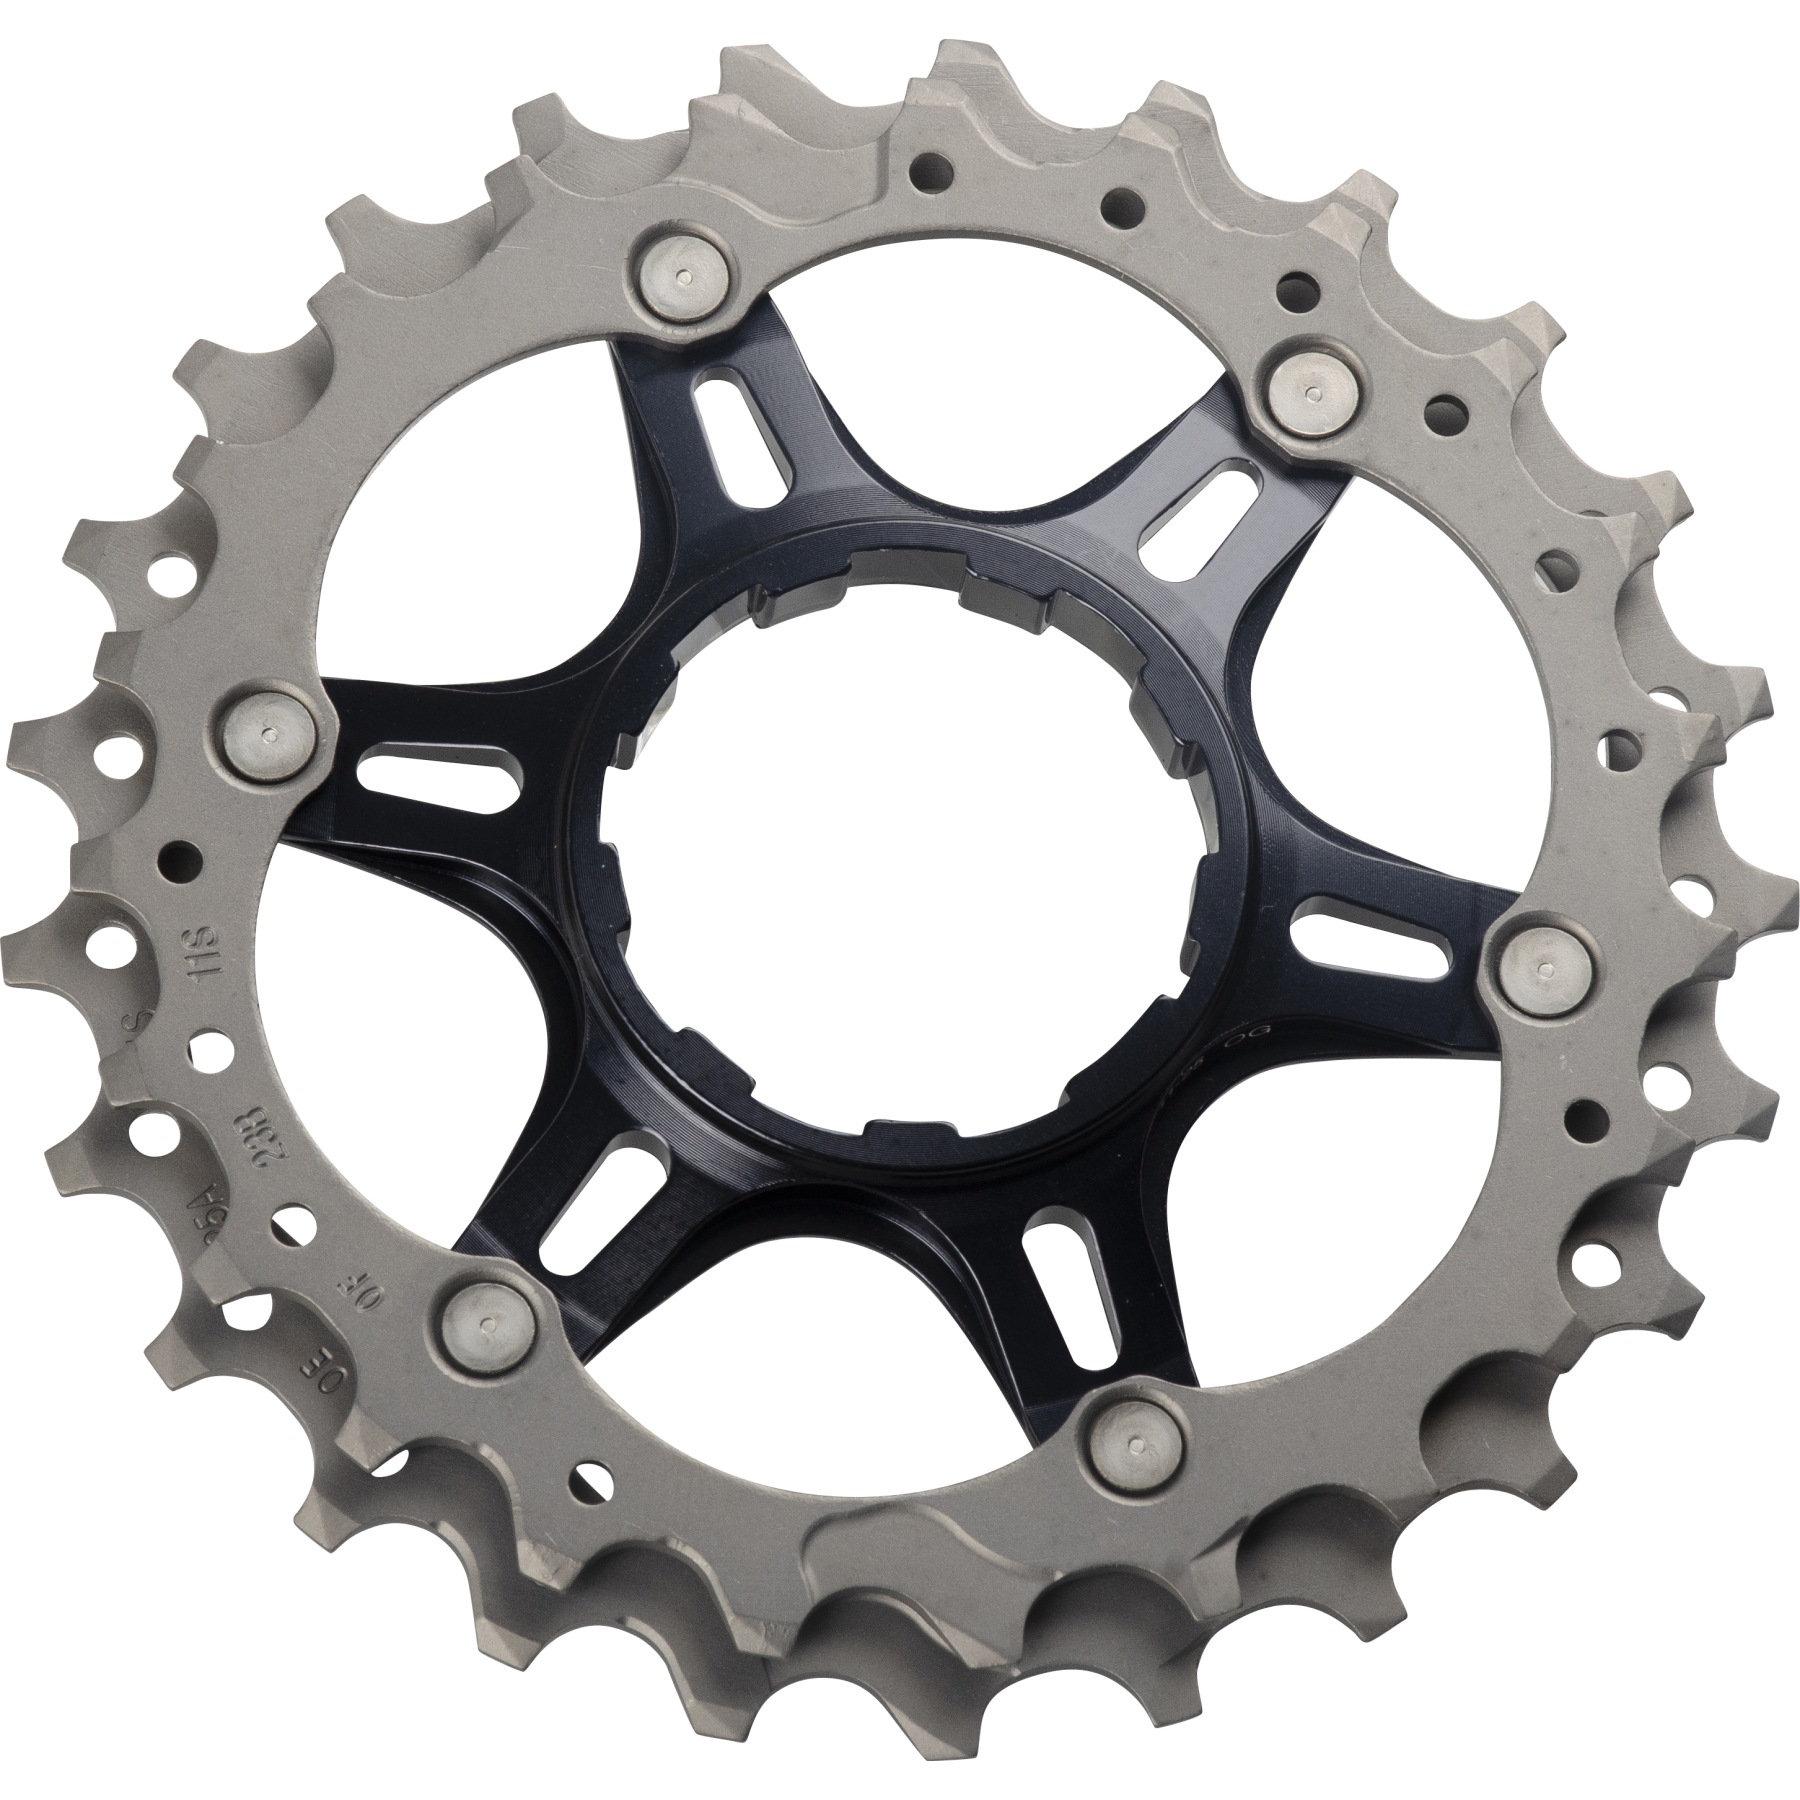 Picture of Shimano Sprocket for Dura Ace 11-Speed Cassette - 23-25 T for 11-25 (Y1VT98030) - CS-R9100 / CS-9000